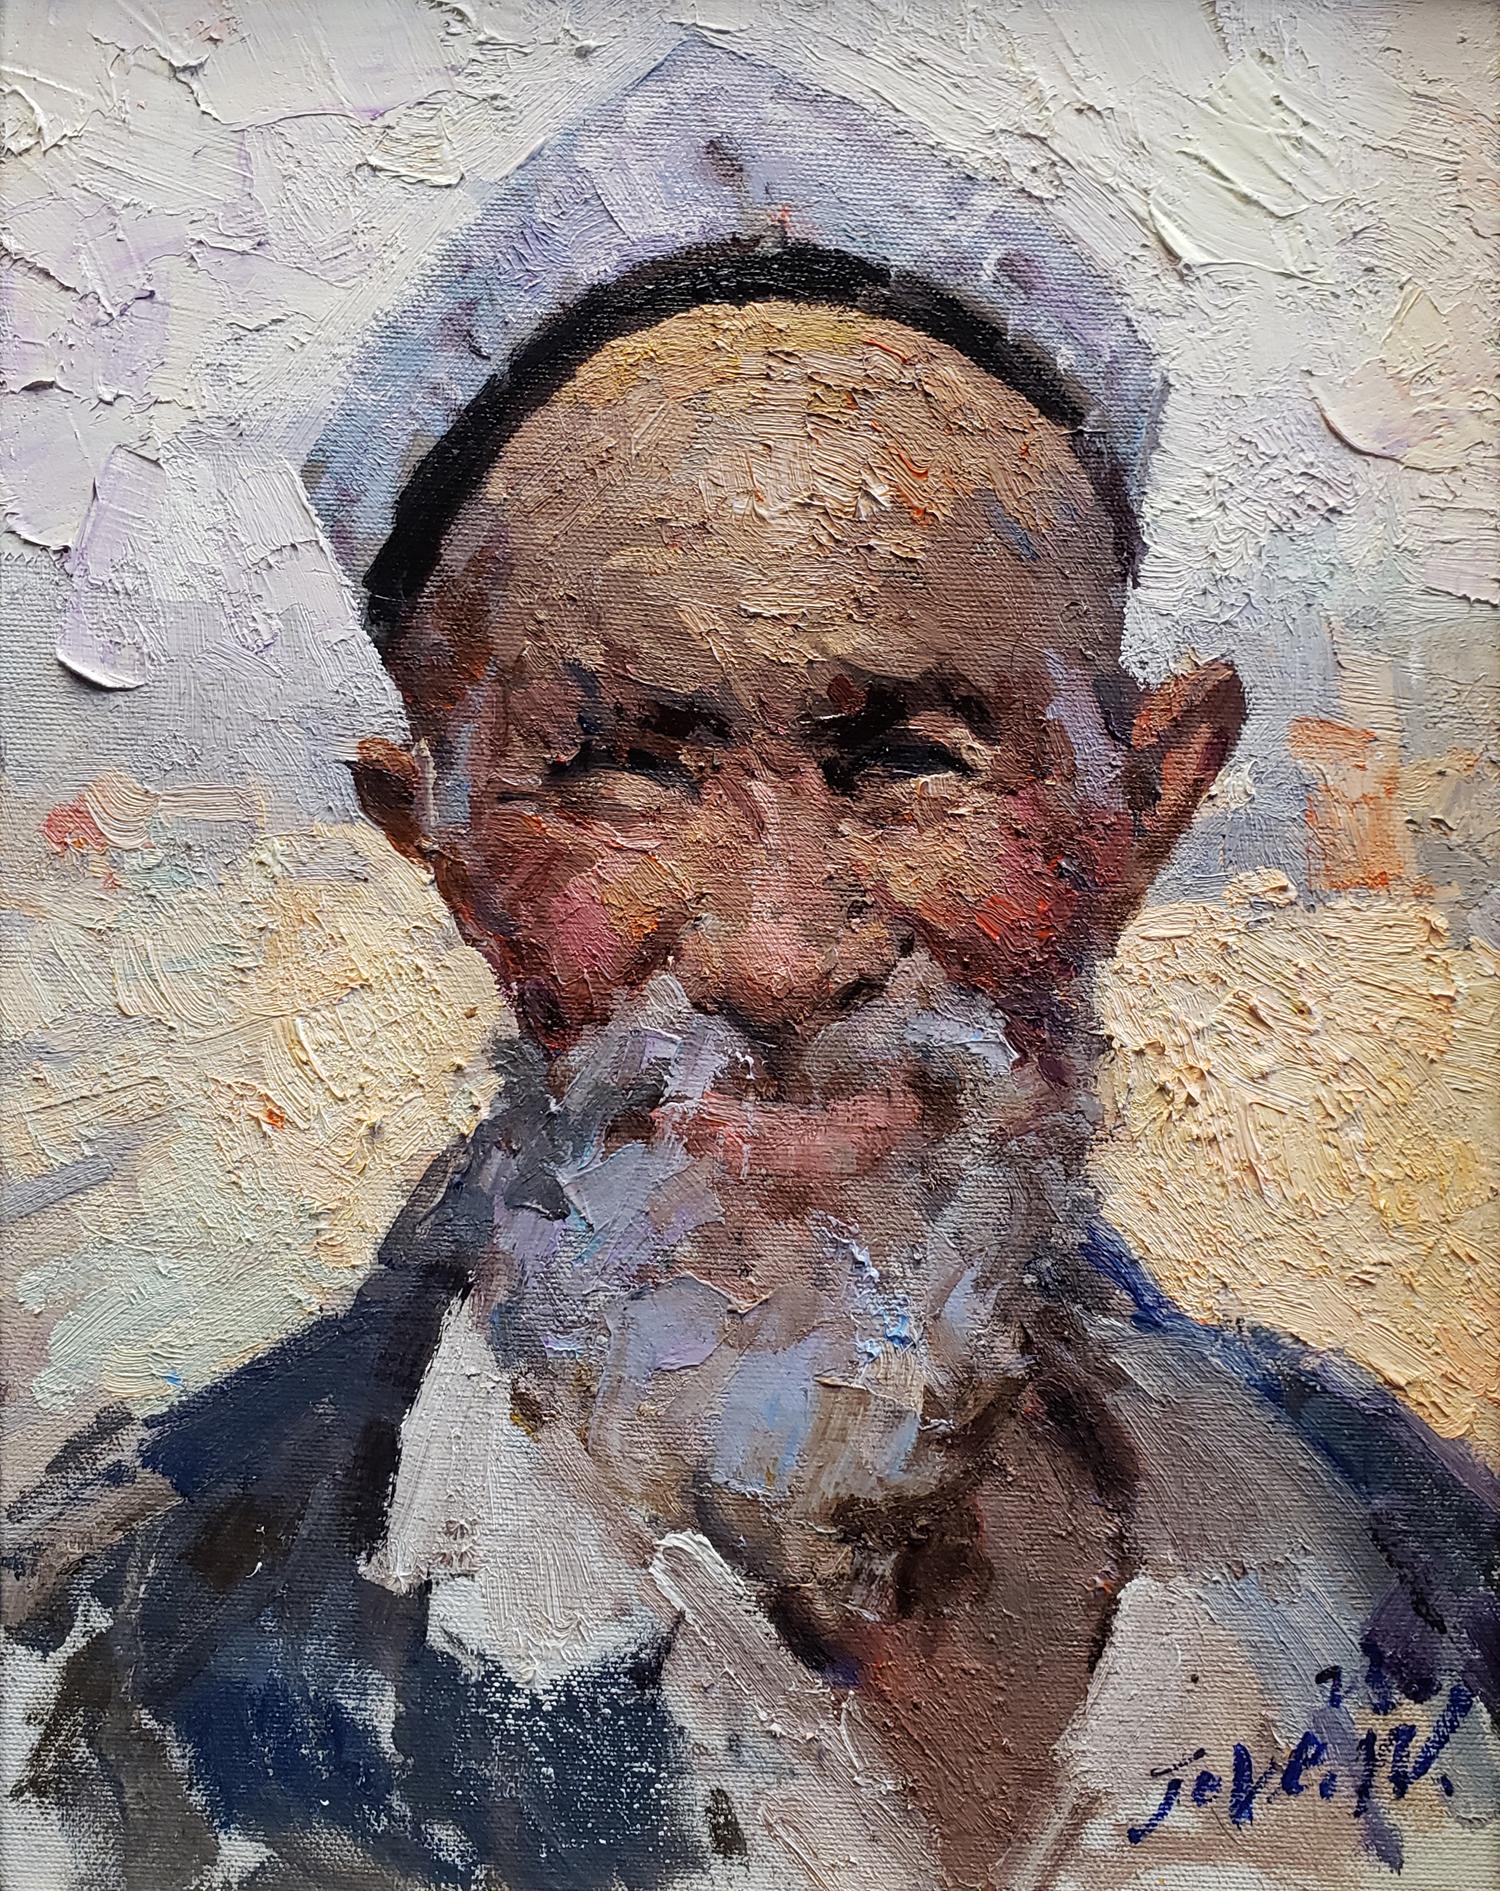 The Old Man with the Little Hat, Xinjing - Painting by Jove Wang